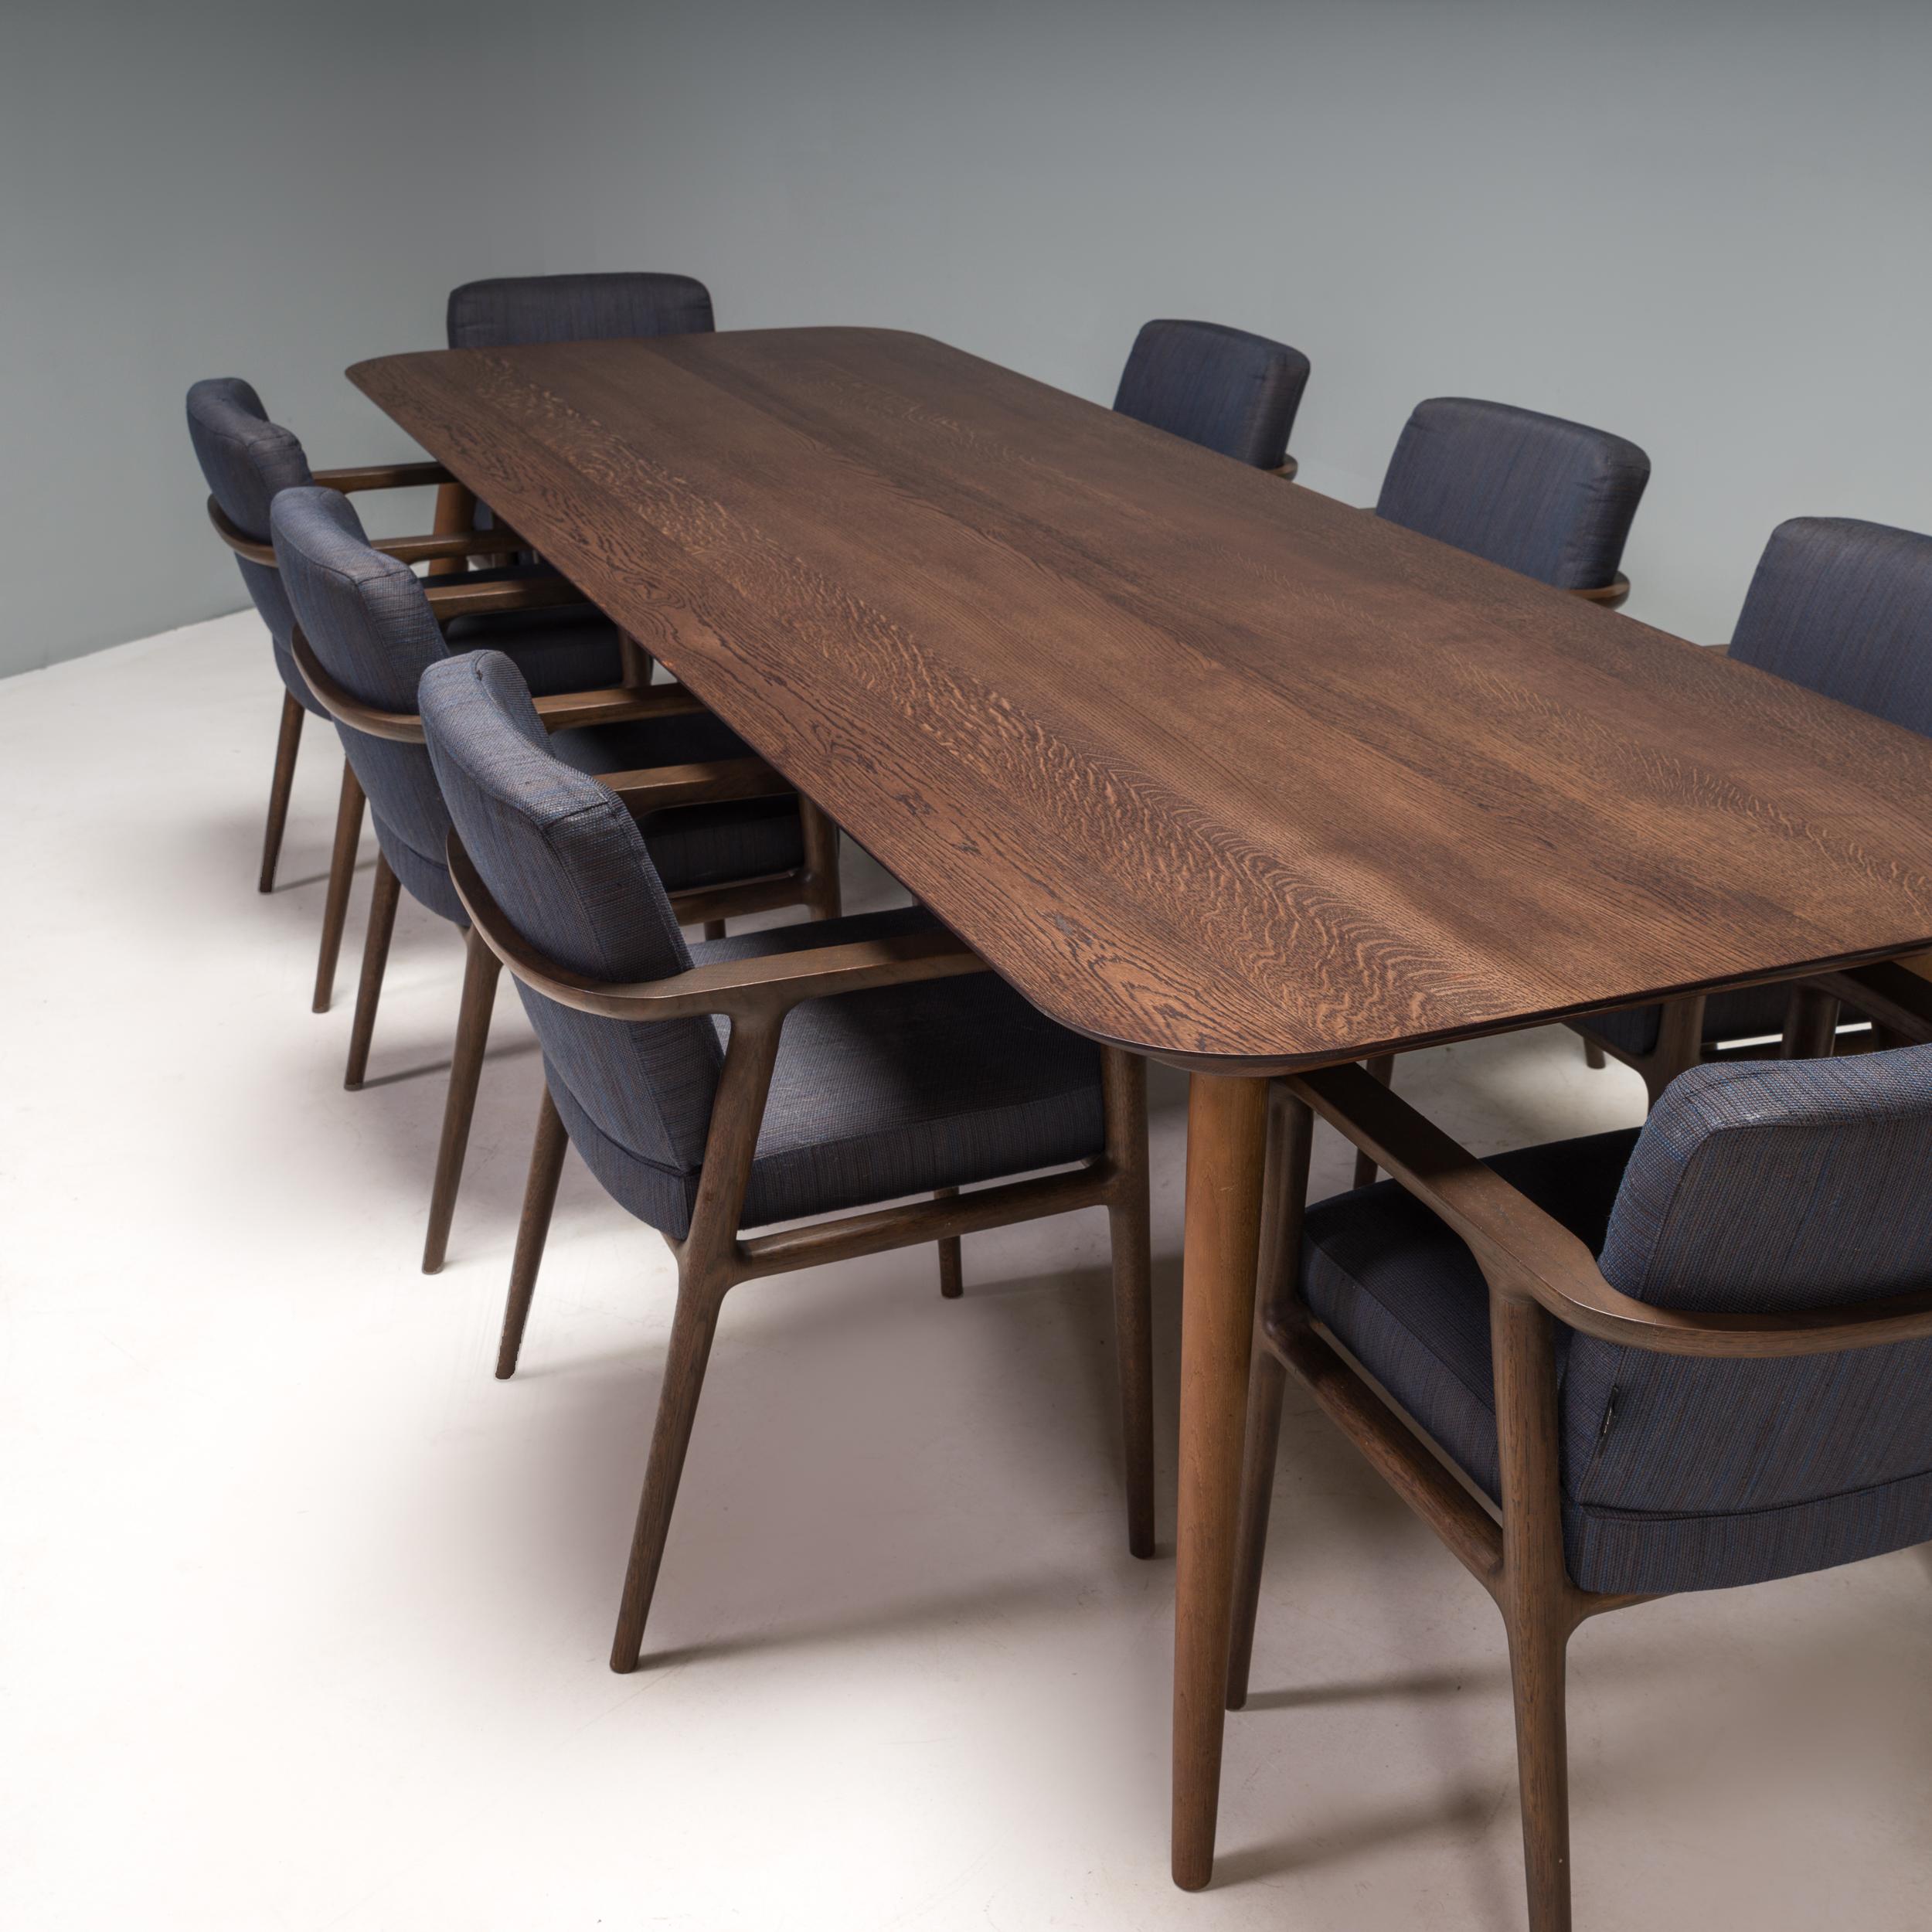 Dutch Marcel Wanders for Moooi Zio Wenge Oak Dining Table & Dining Chairs Set